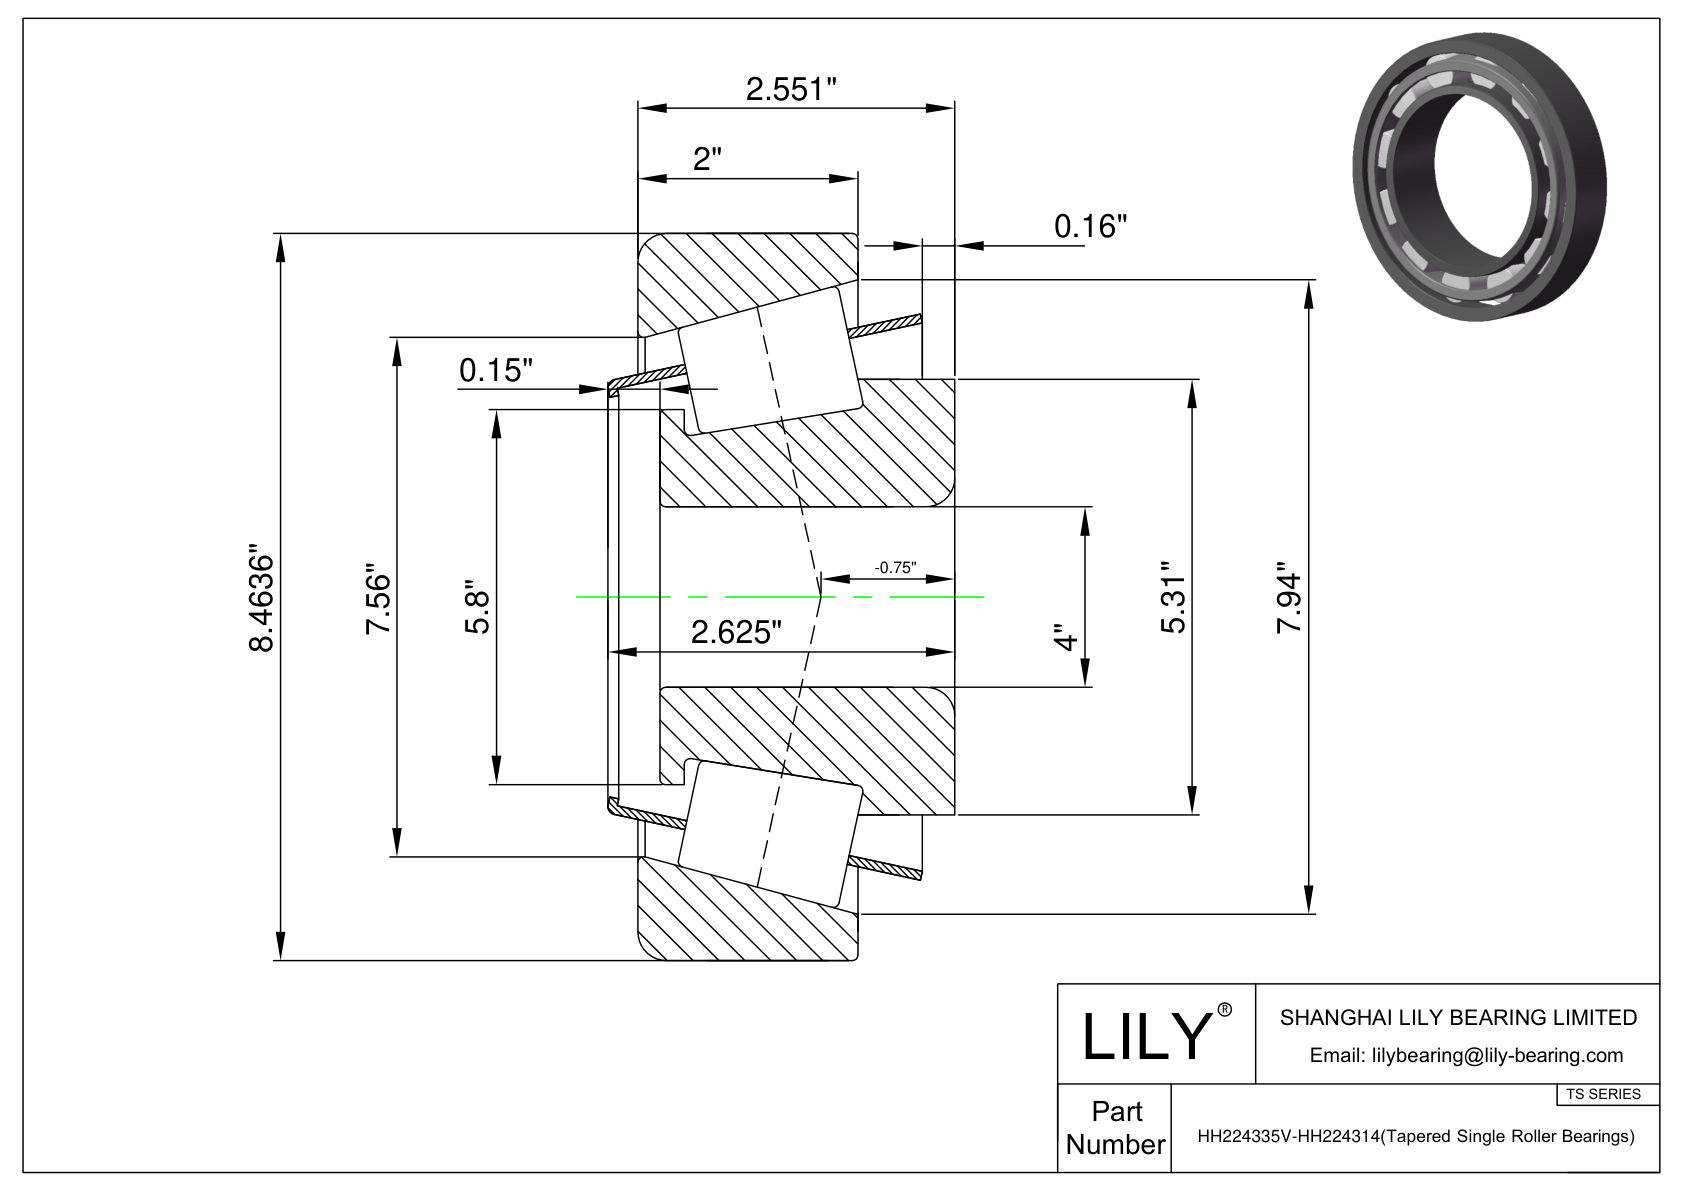 HH224335V-HH224314 TS (Tapered Single Roller Bearings) (Imperial) cad drawing